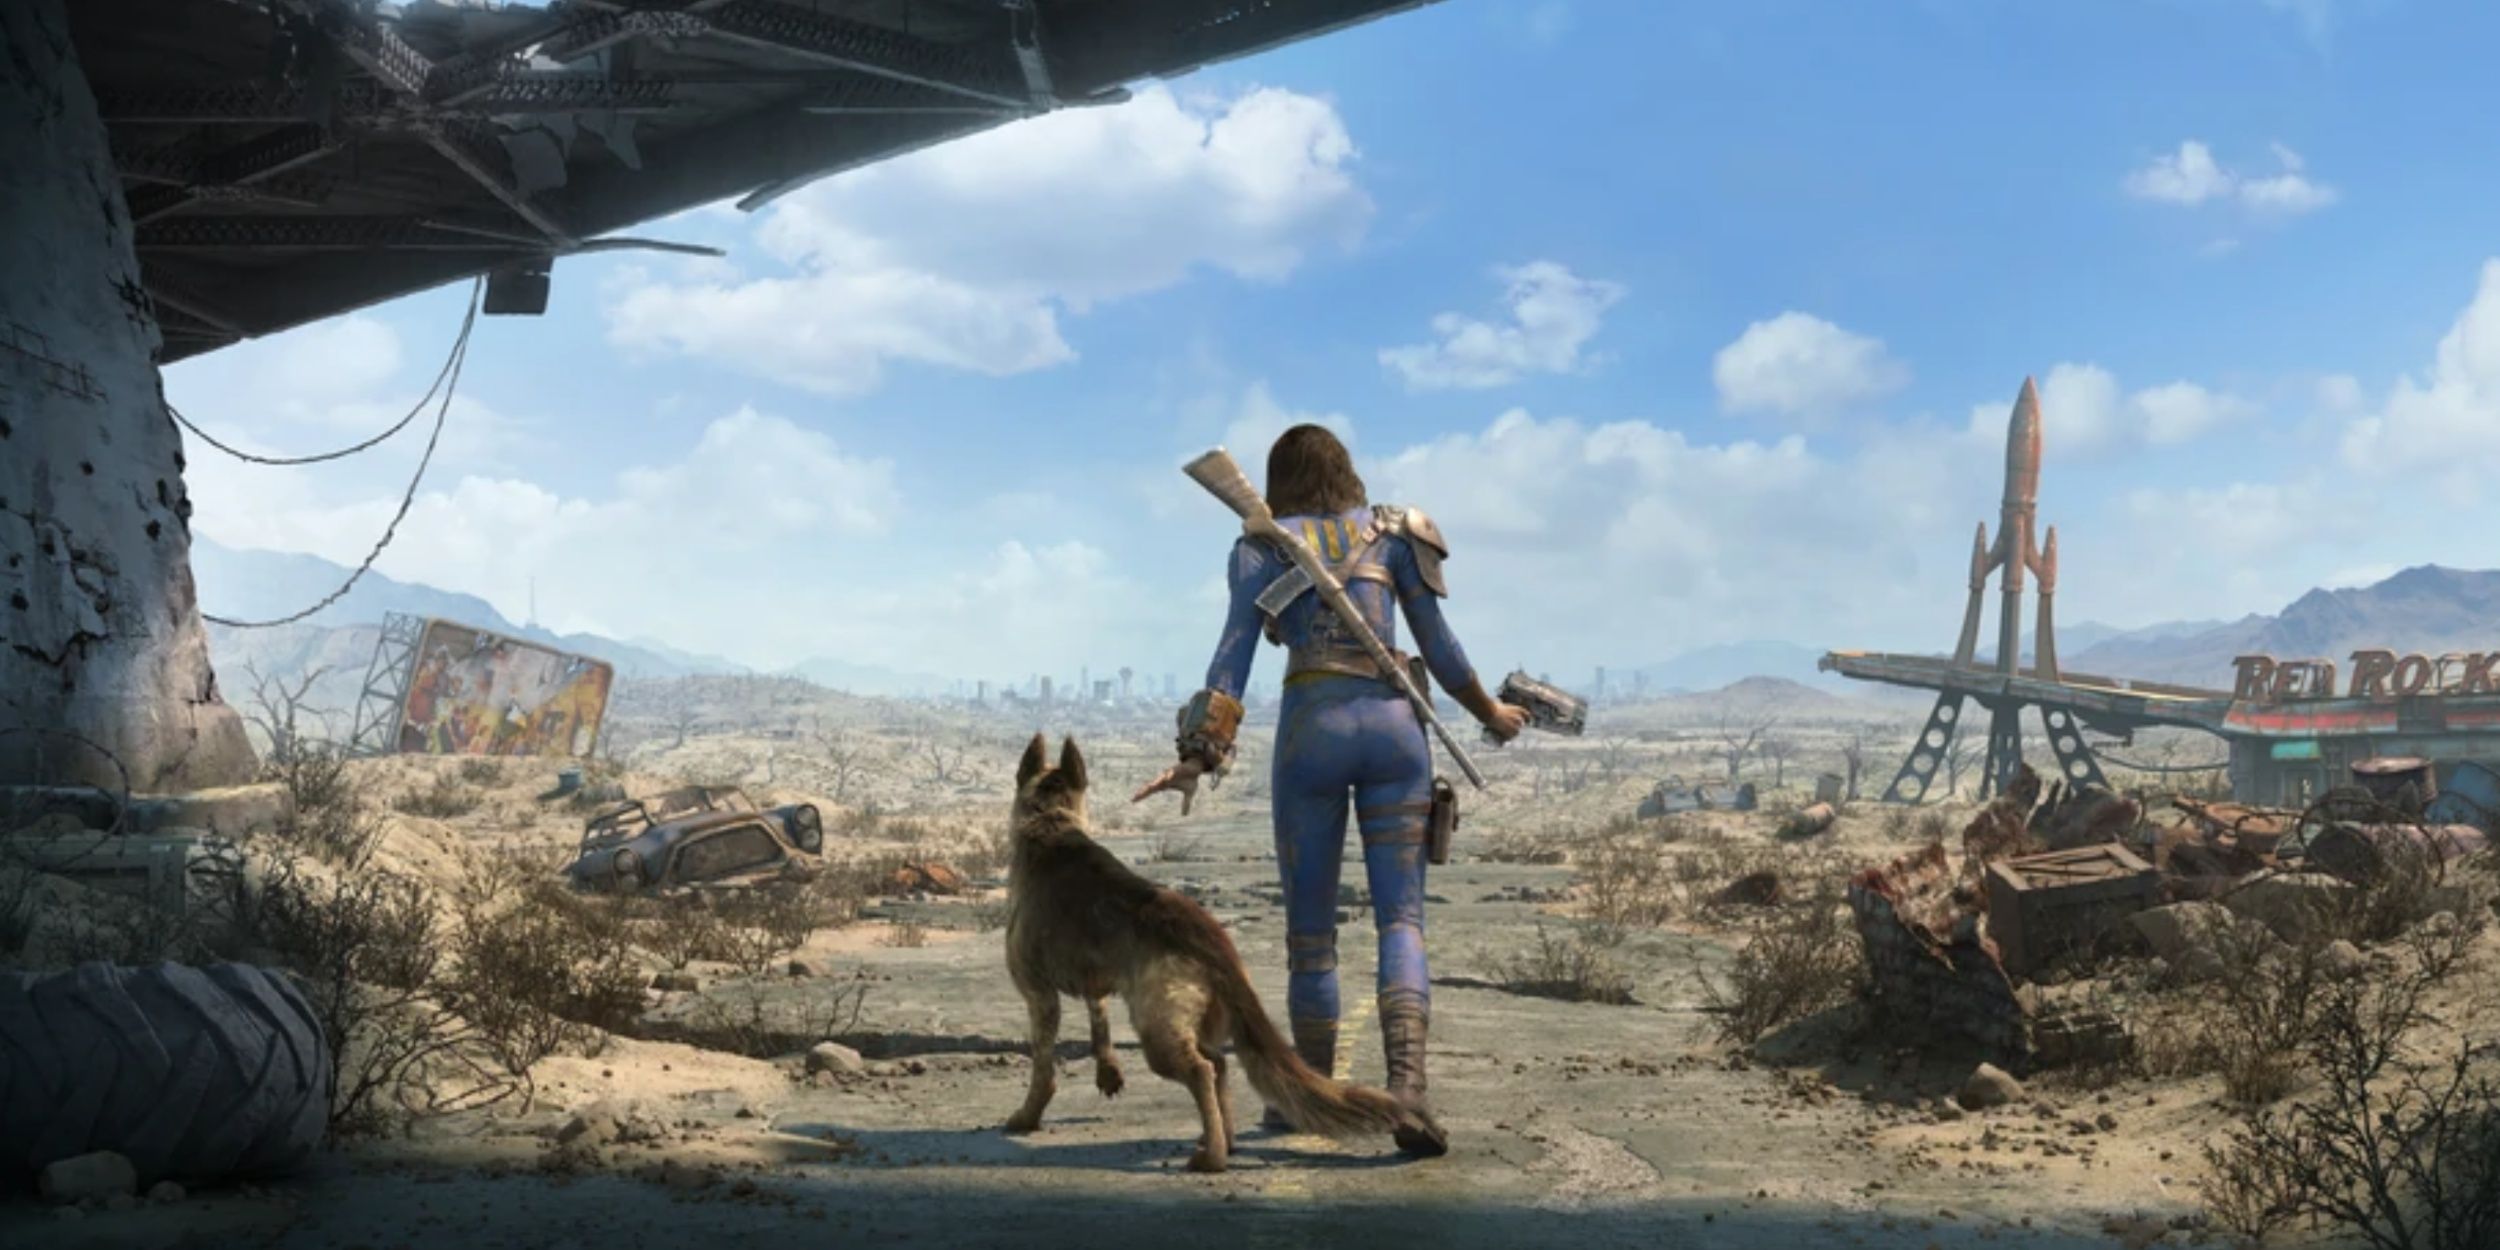 Official art for Fallout 4, the female Sole Survivor and her dog venture out into the wasteland, armed for exploration.